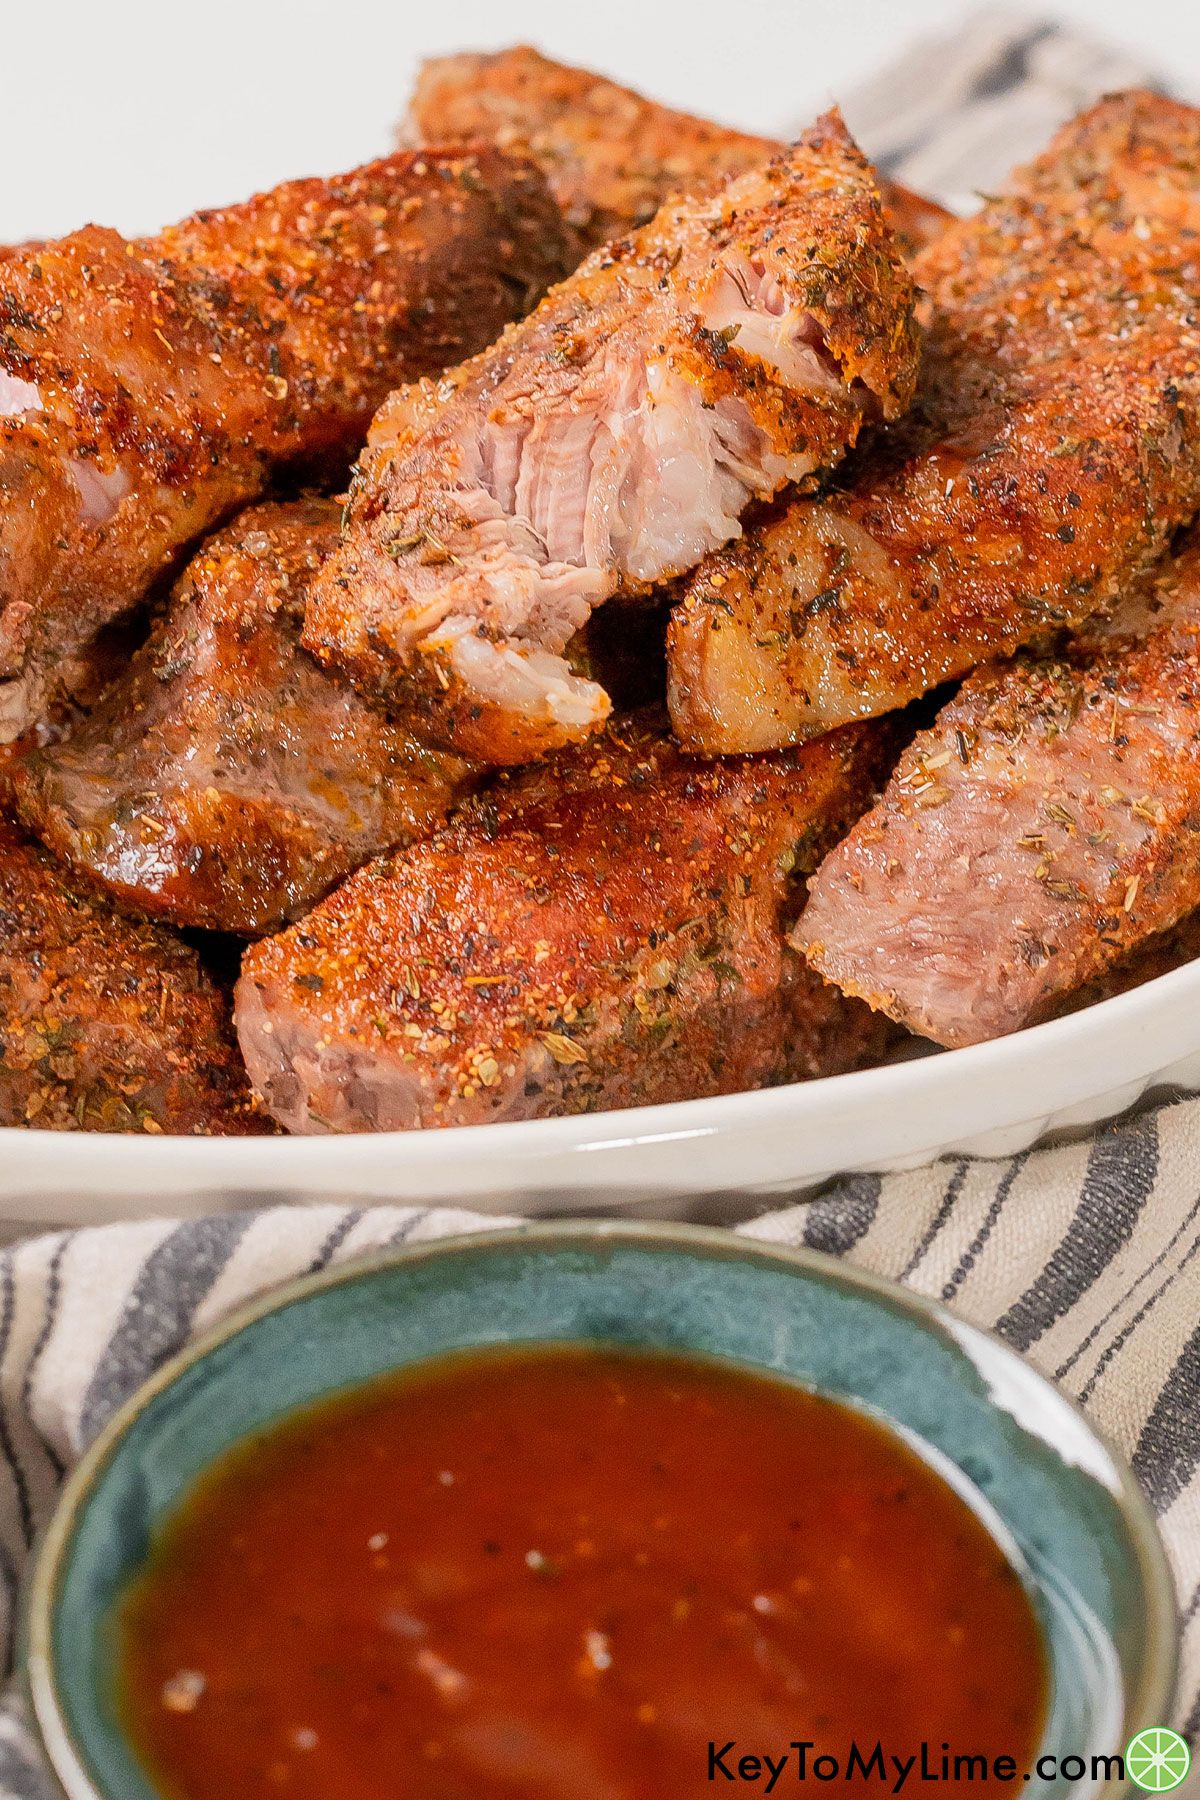 A close up image of tender fall apart boneless pork ribs baked in the oven.